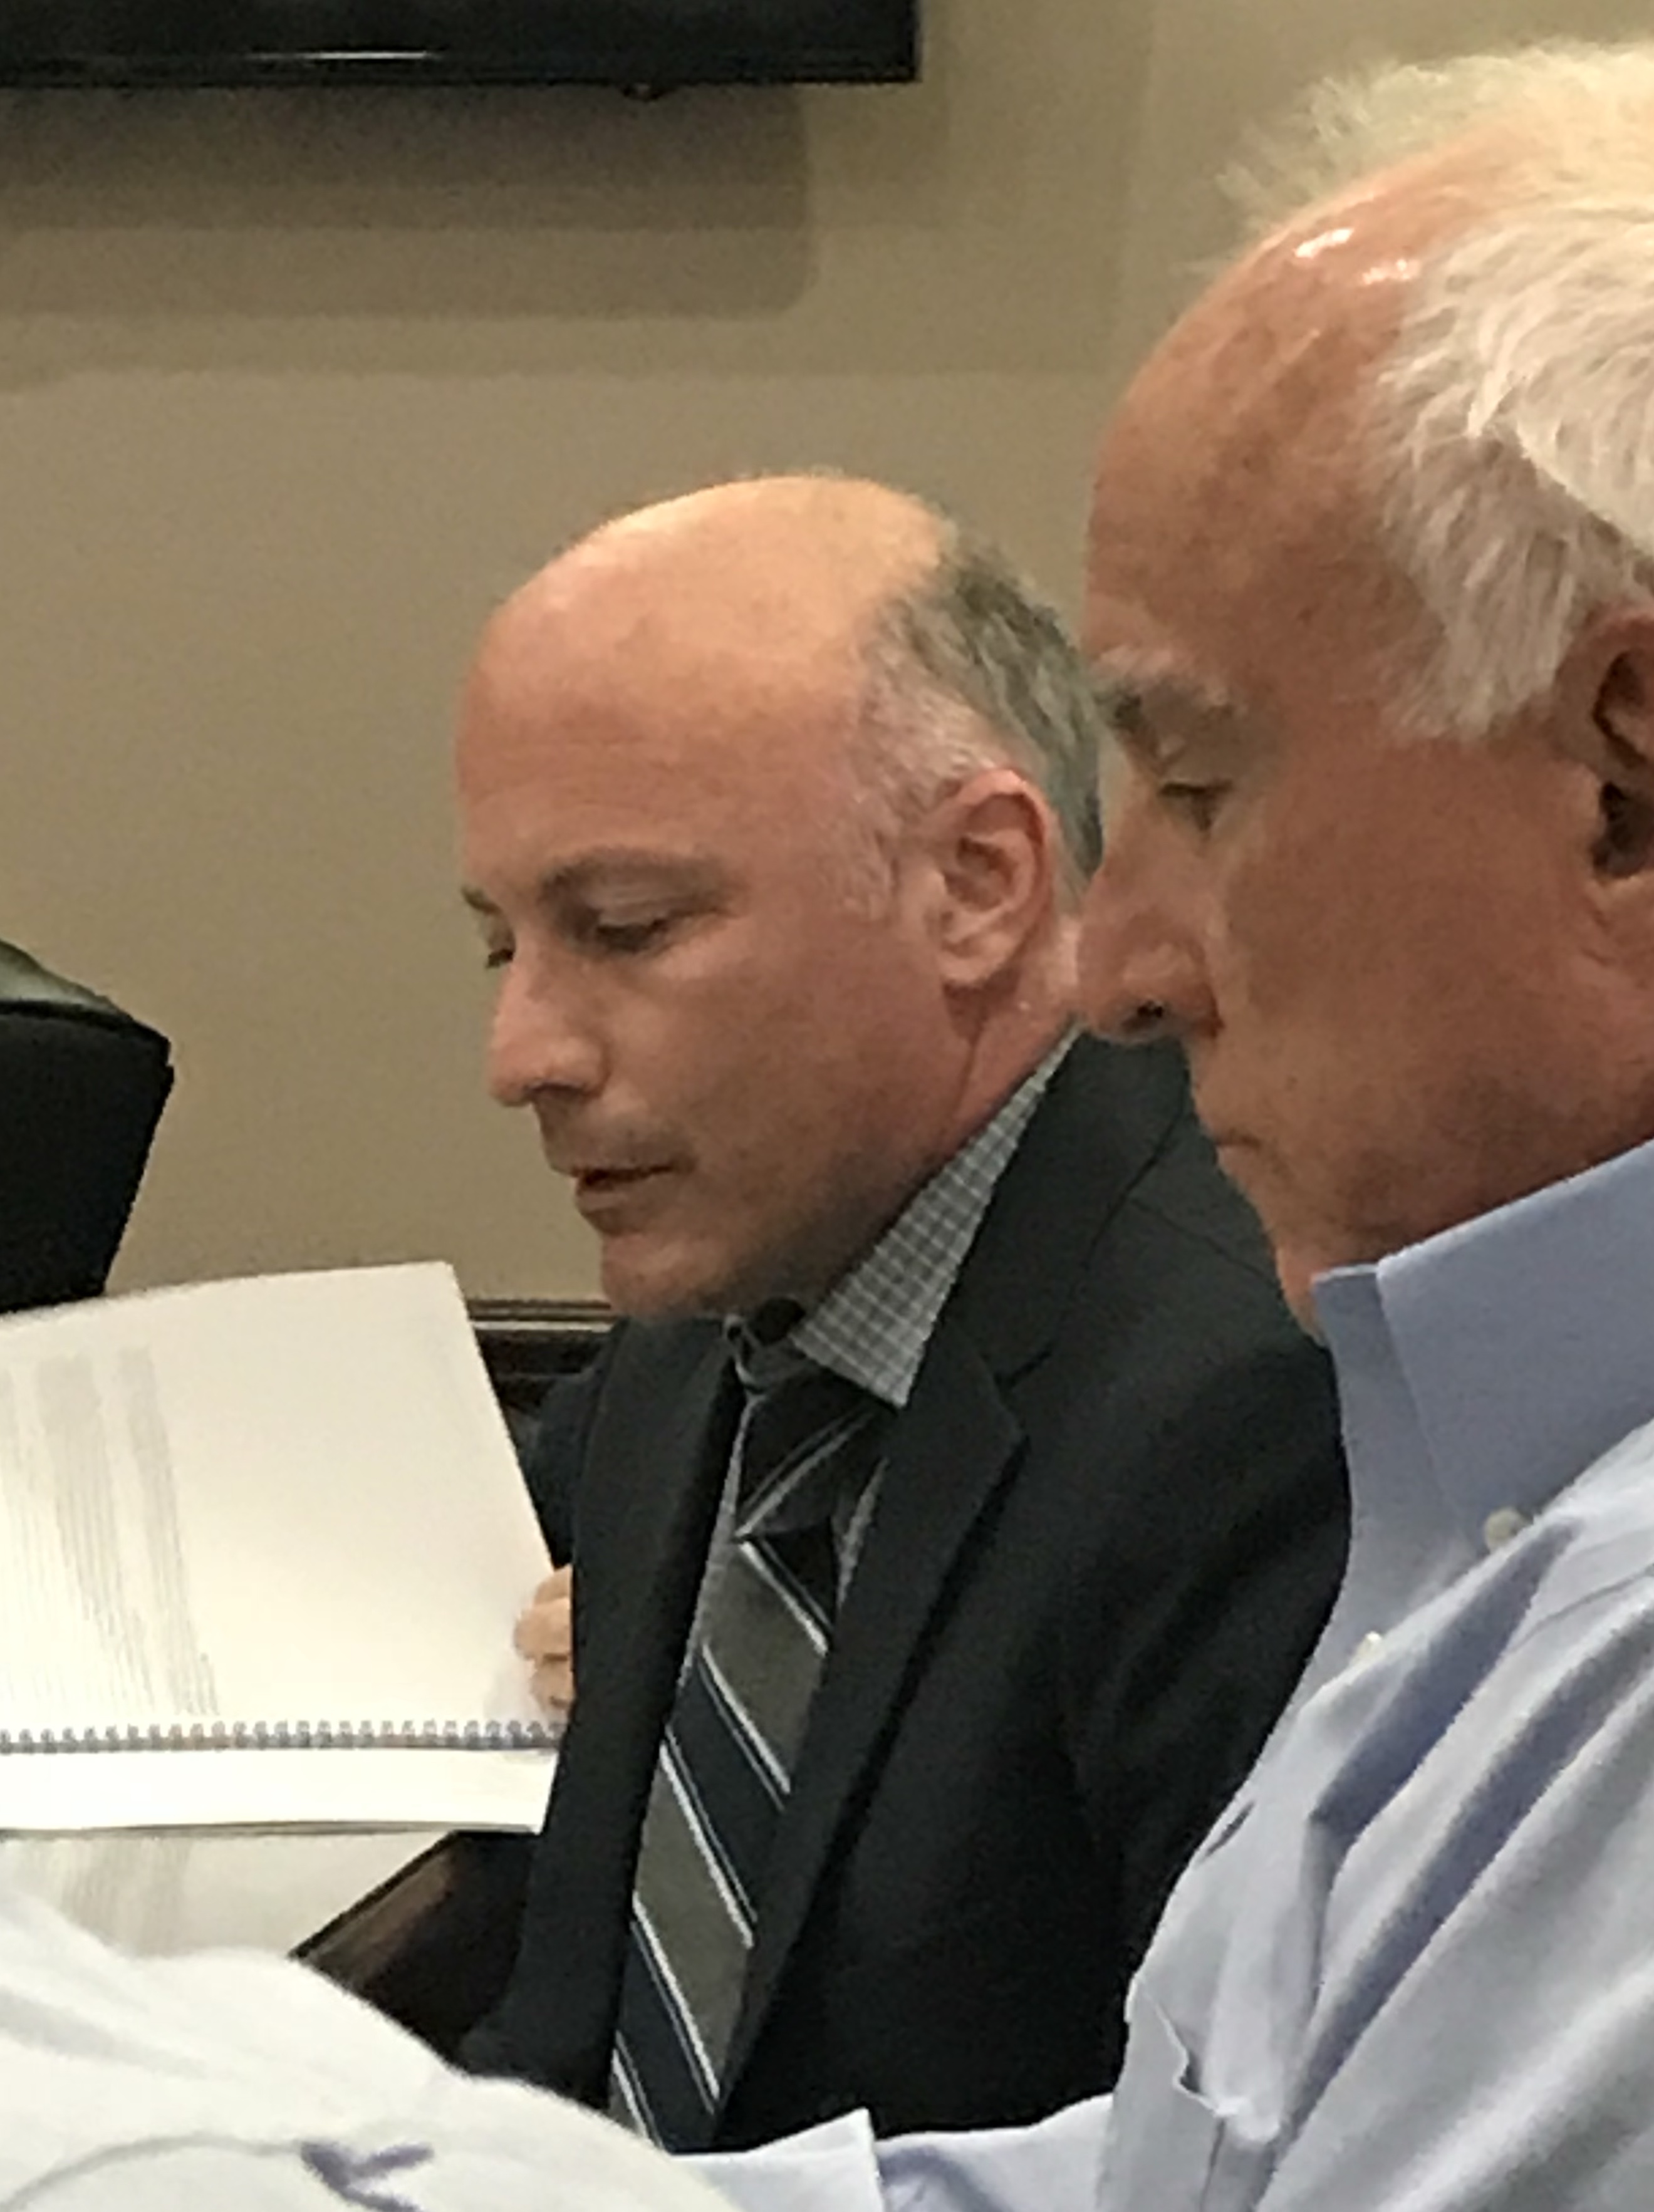 Mr Jeff Amrose (pictured left), Board Actuary from GRS Retirement Consultiing presented the West Palm Beach Police Pension Fund Actuarial Valuation Report as of September 30, 2018 (for funding in fiscal year 2019/2020).